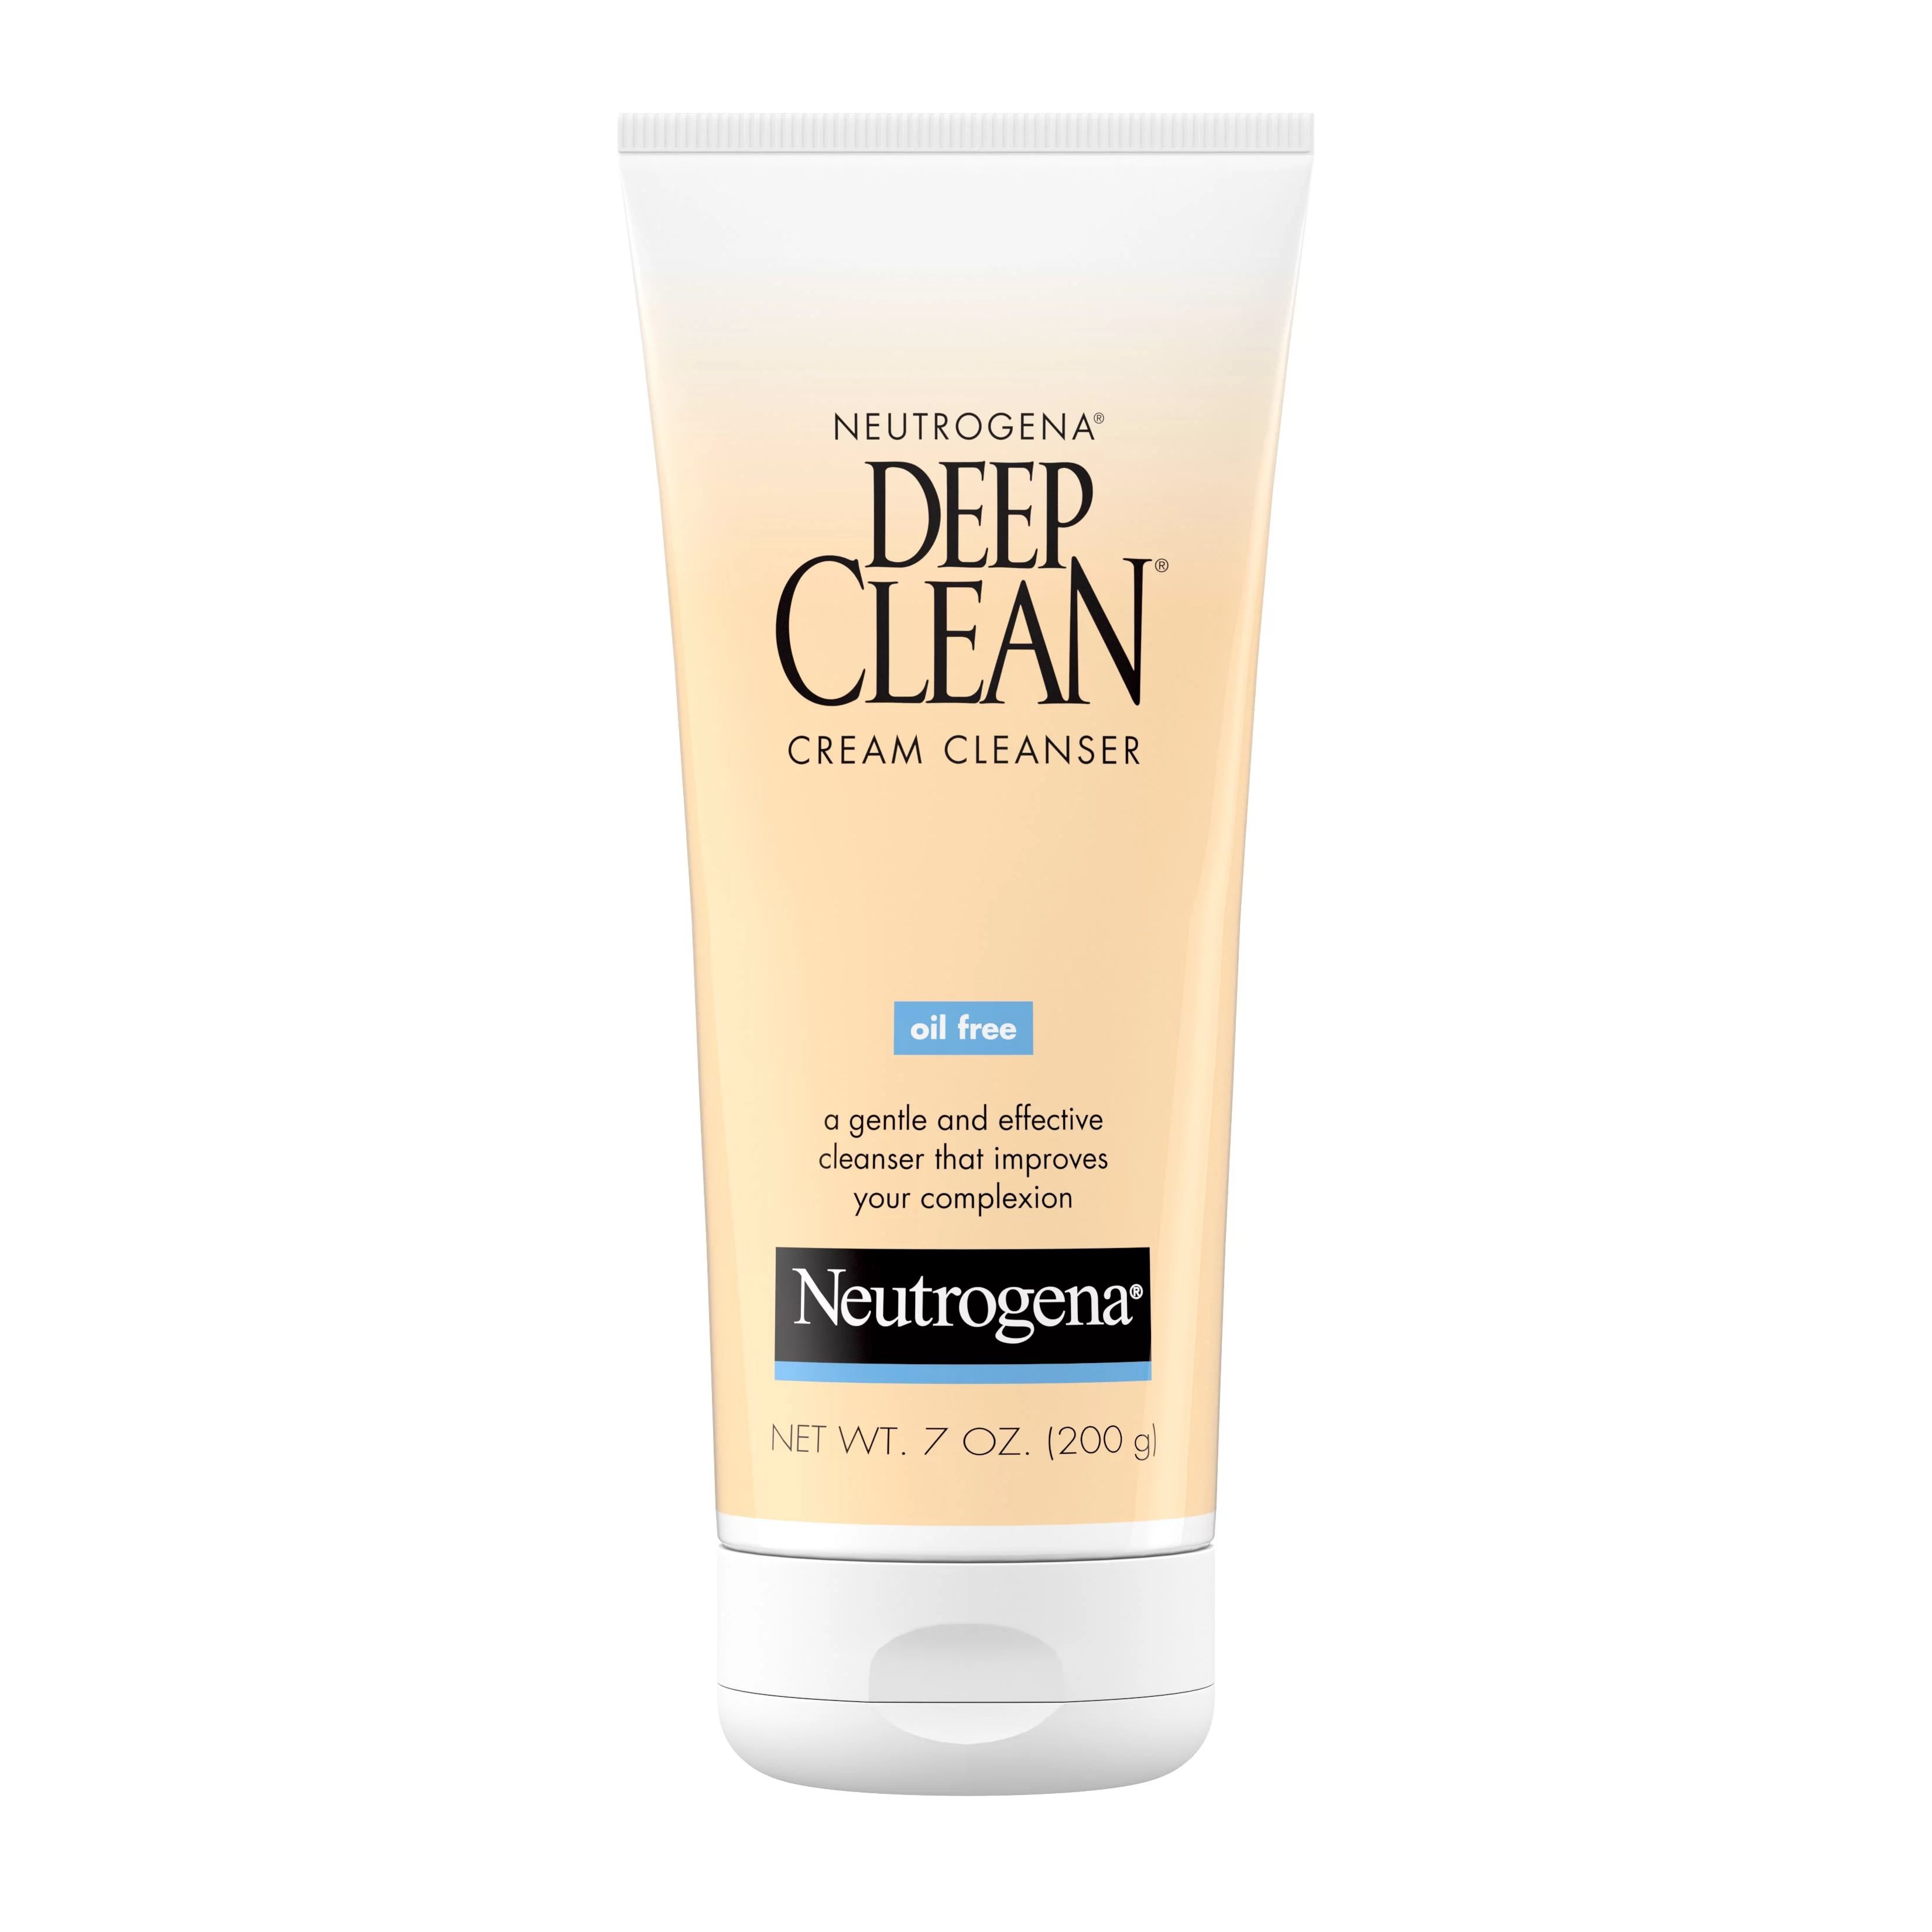 Neutrogena Deep Clean Daily Facial Cream Cleanser with Beta Hydroxy Acid to Remove Dirt, Oil & Ma... | Walmart (US)